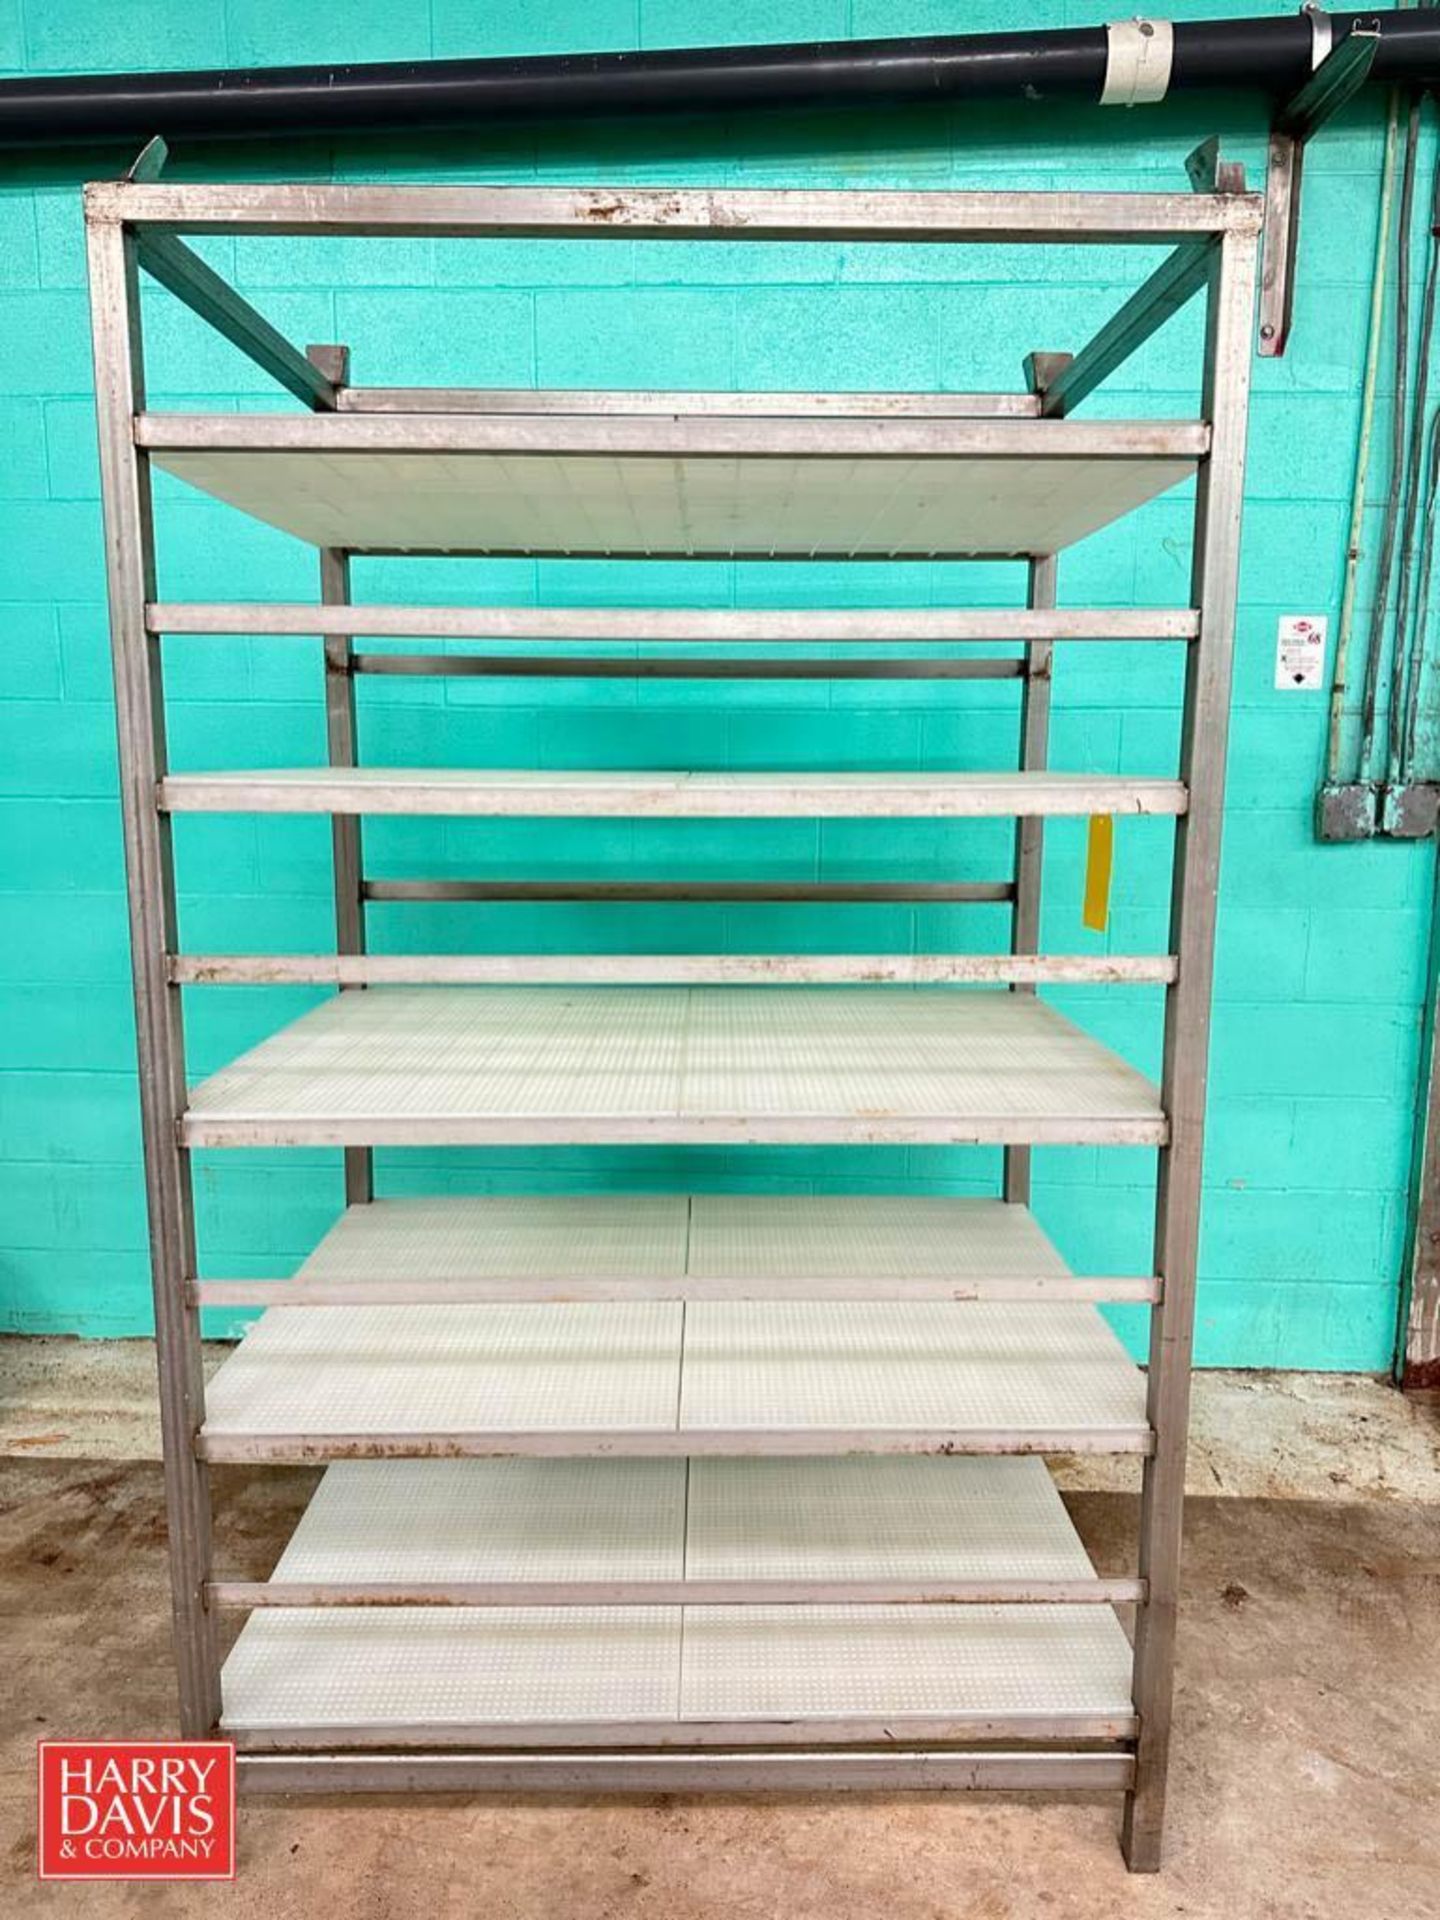 (4) S/S Racks: 74" x 32" x 46" Depth with Poly Shelves and Case Trays